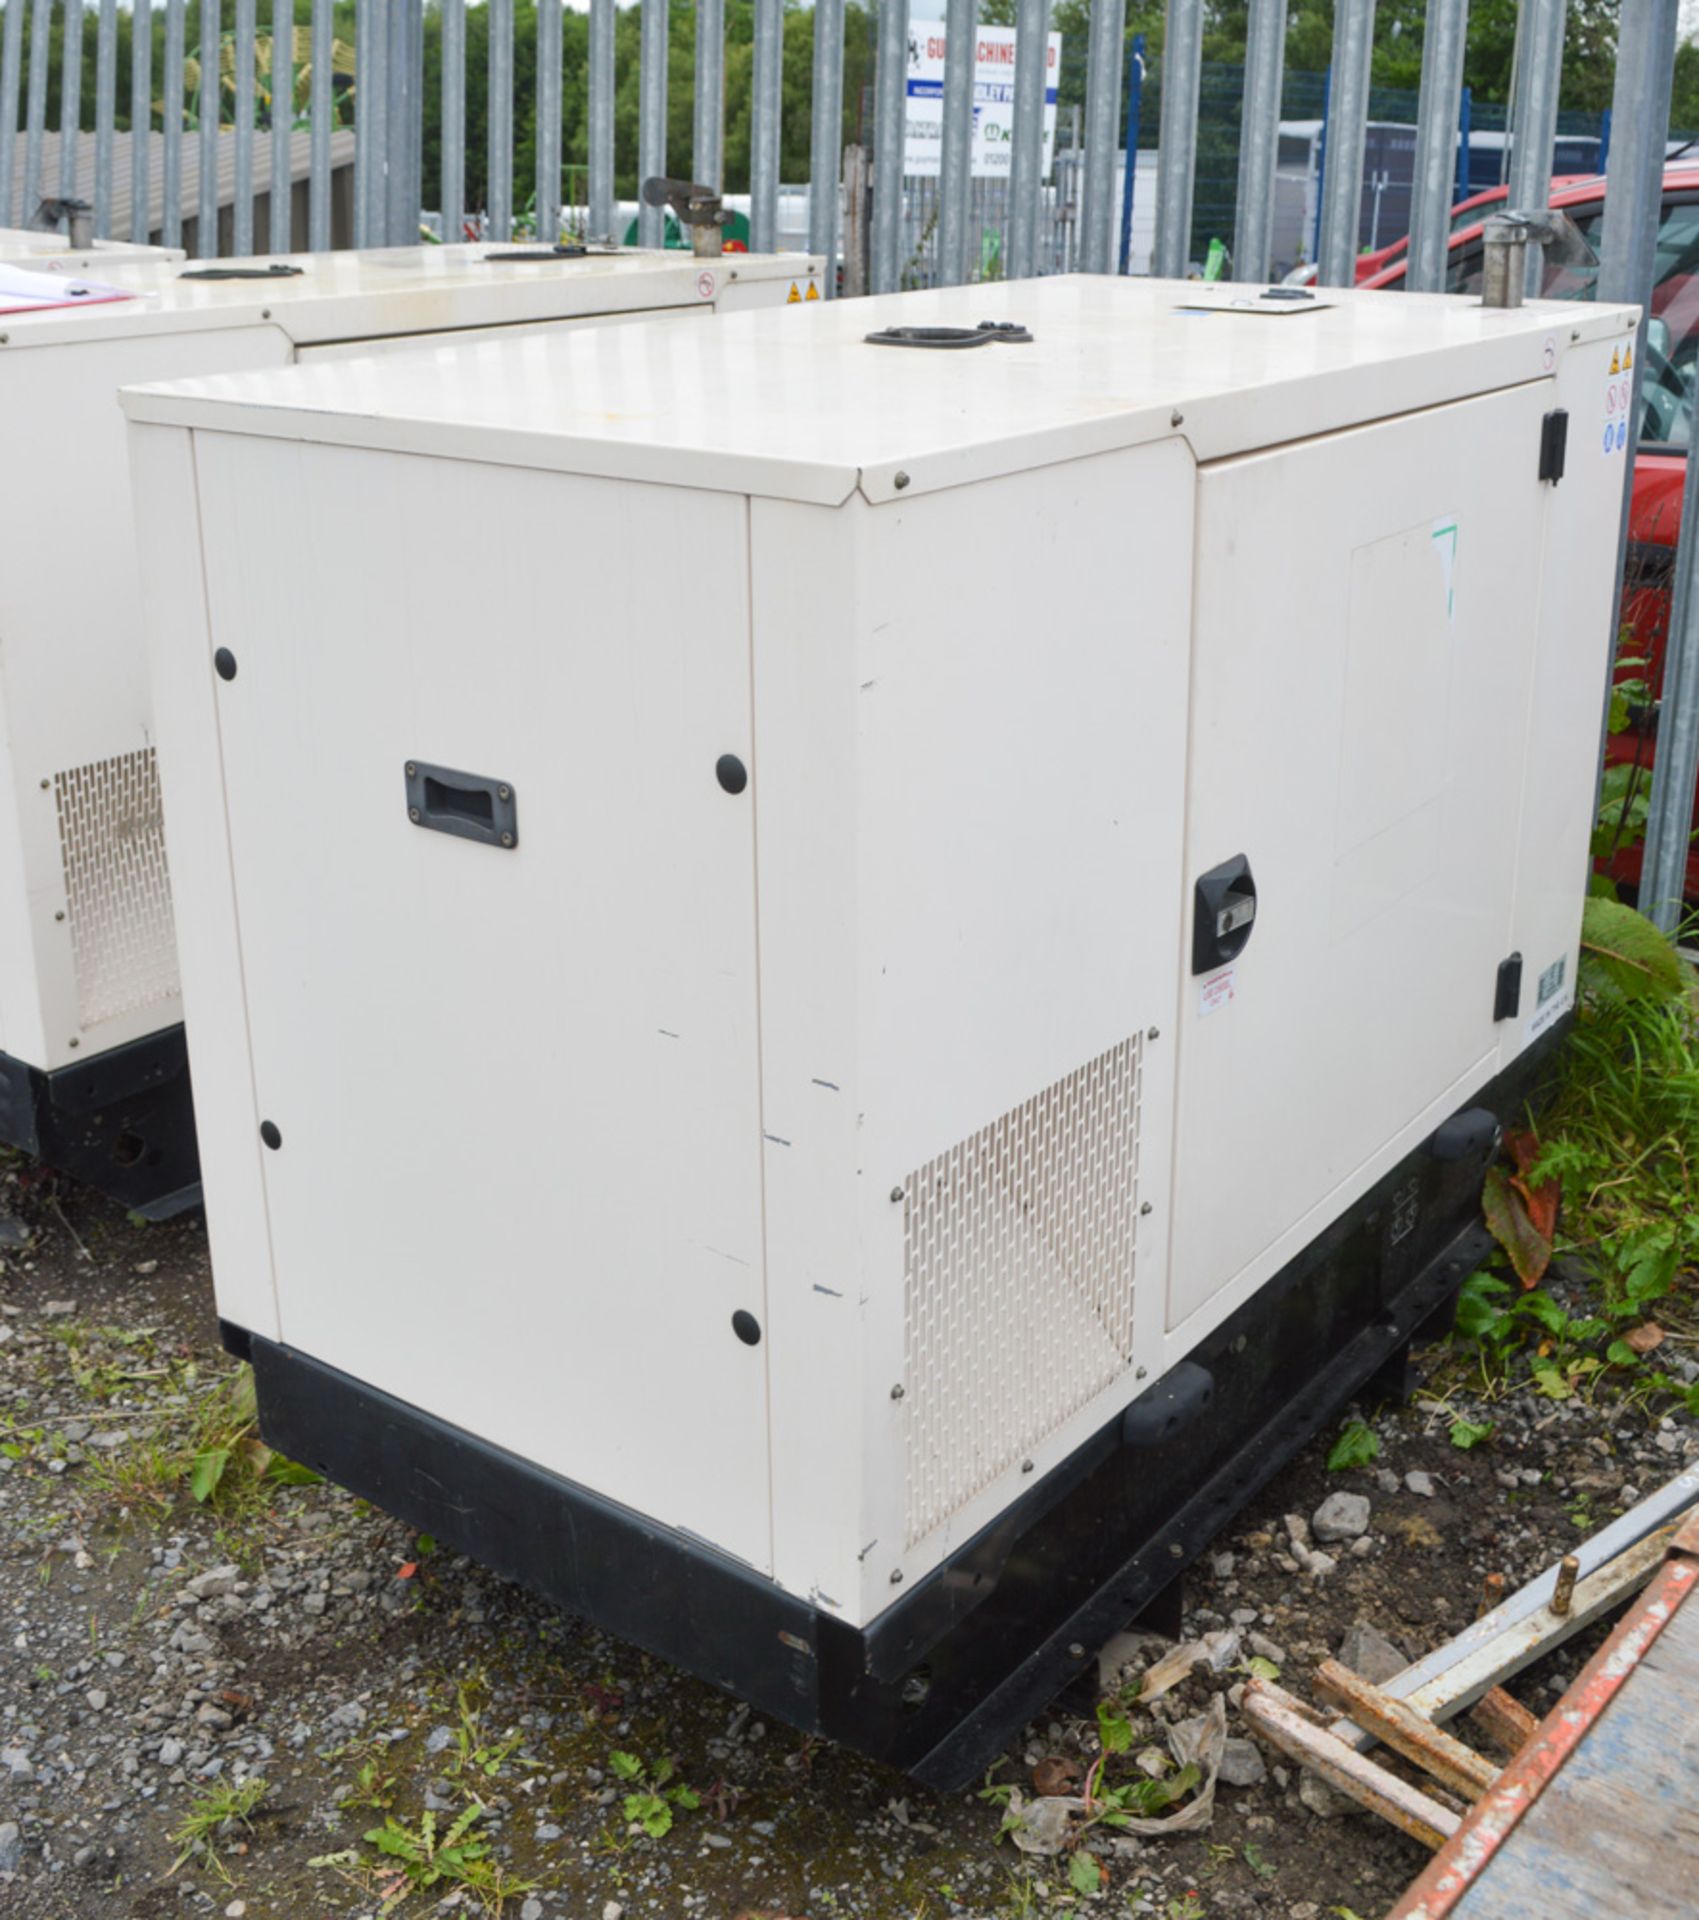 FG Wilson XD20P4 20 kva diesel driven generator Year: 2011 S/N: 09288 Recorded Hours: 4659 A565901 - Image 2 of 4